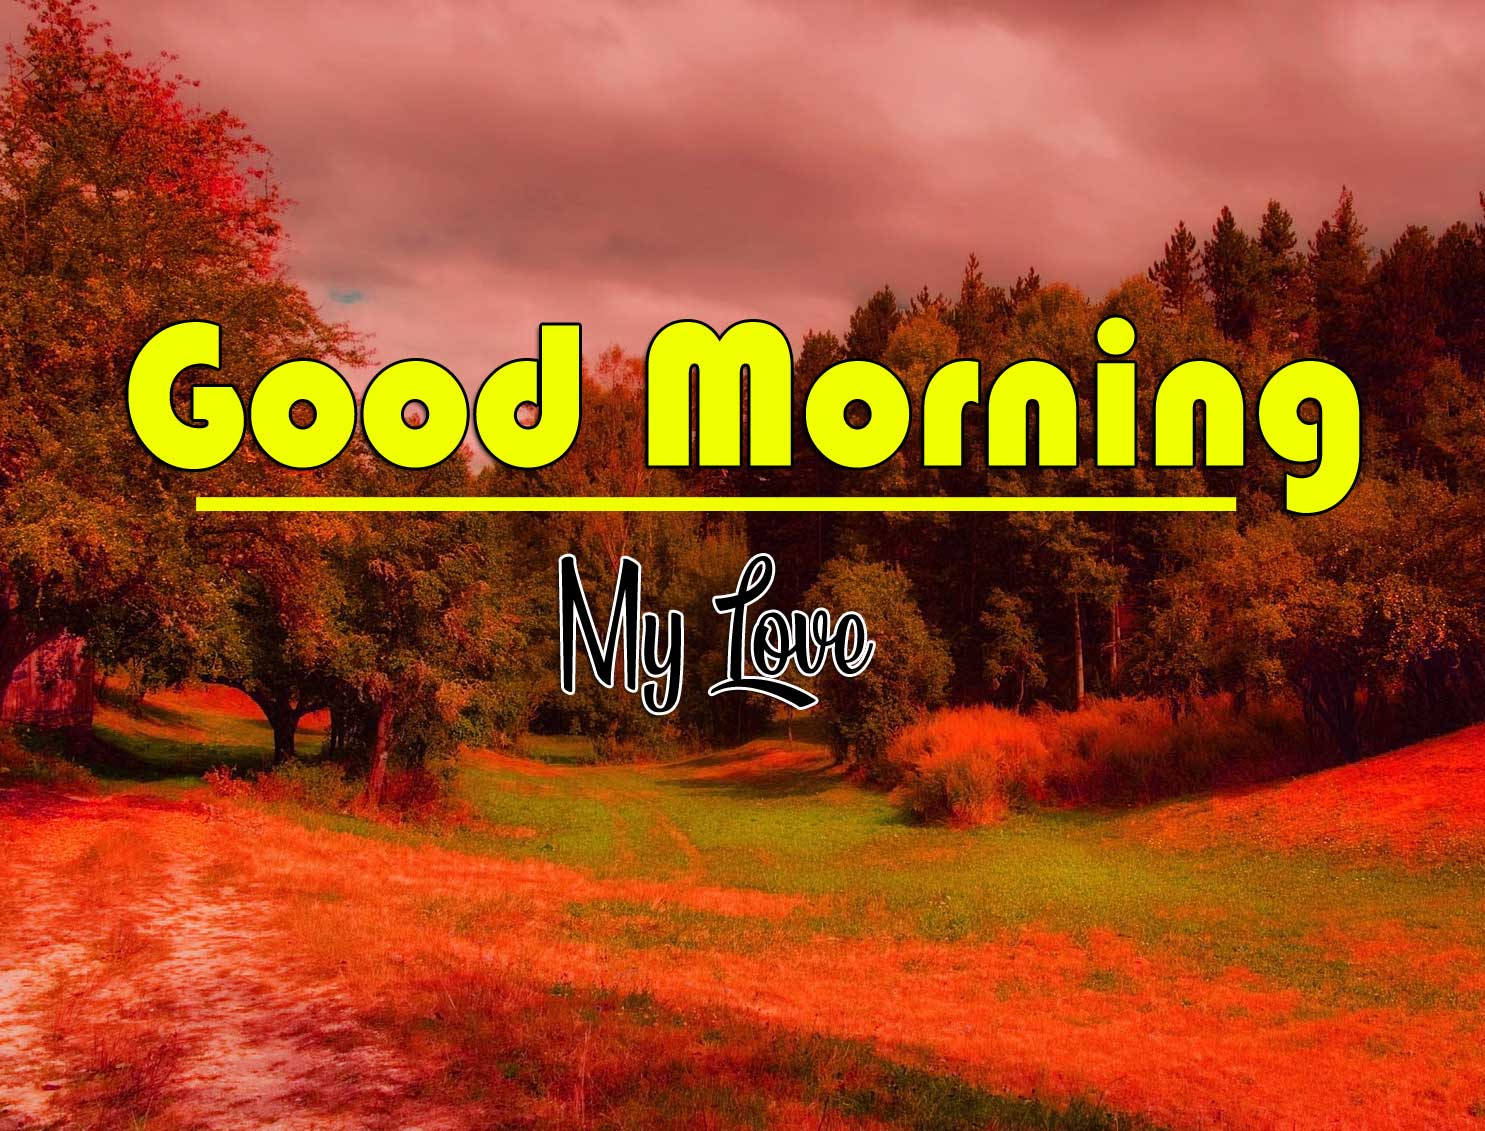 Free Good Morning Wishes Wallpaper Pics Download 